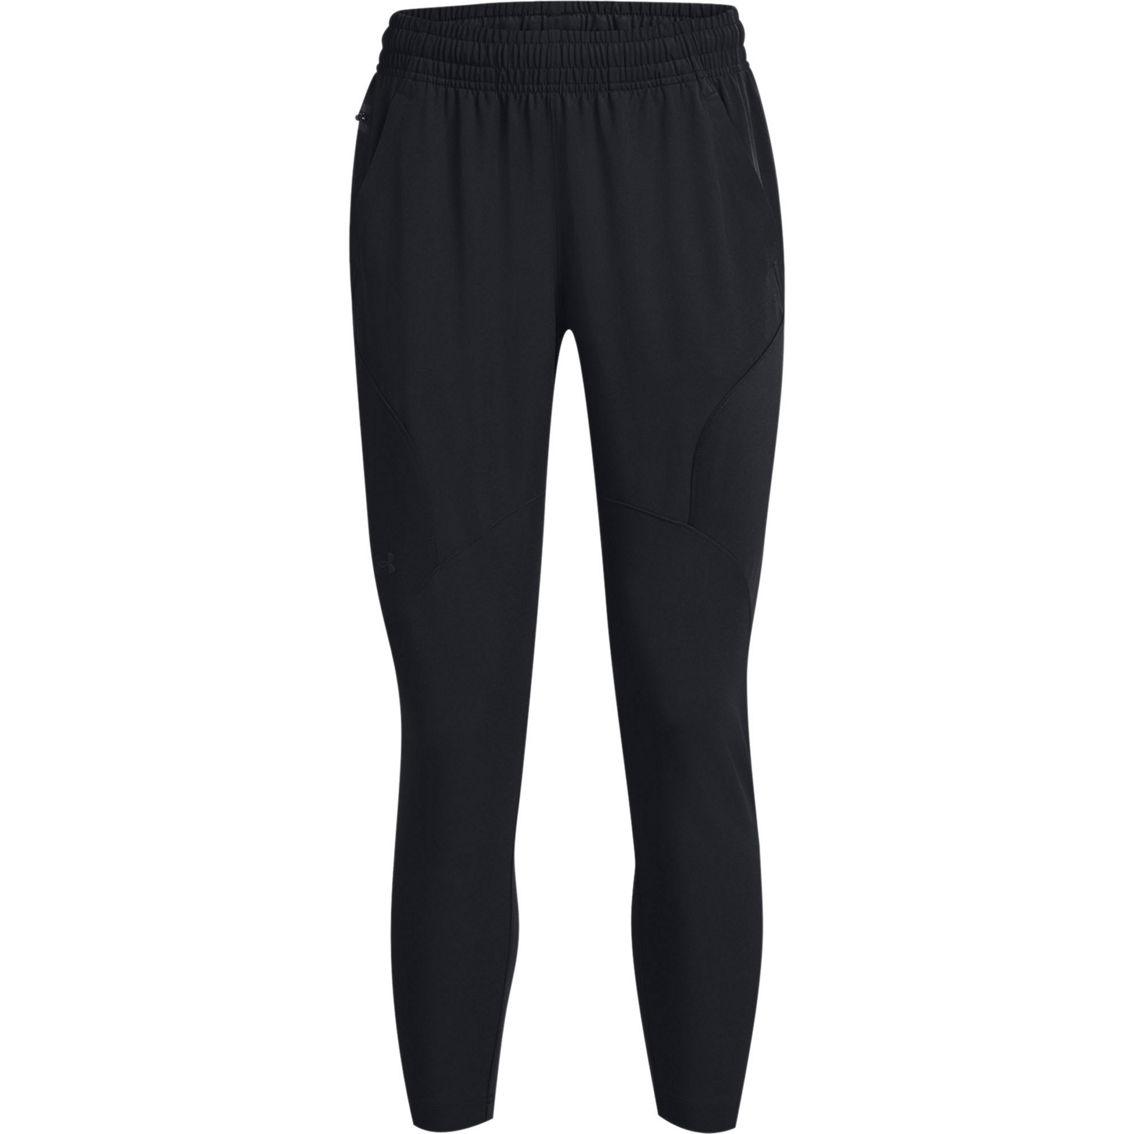 Under Armour Unstoppable Hybrid Pants - Image 7 of 8